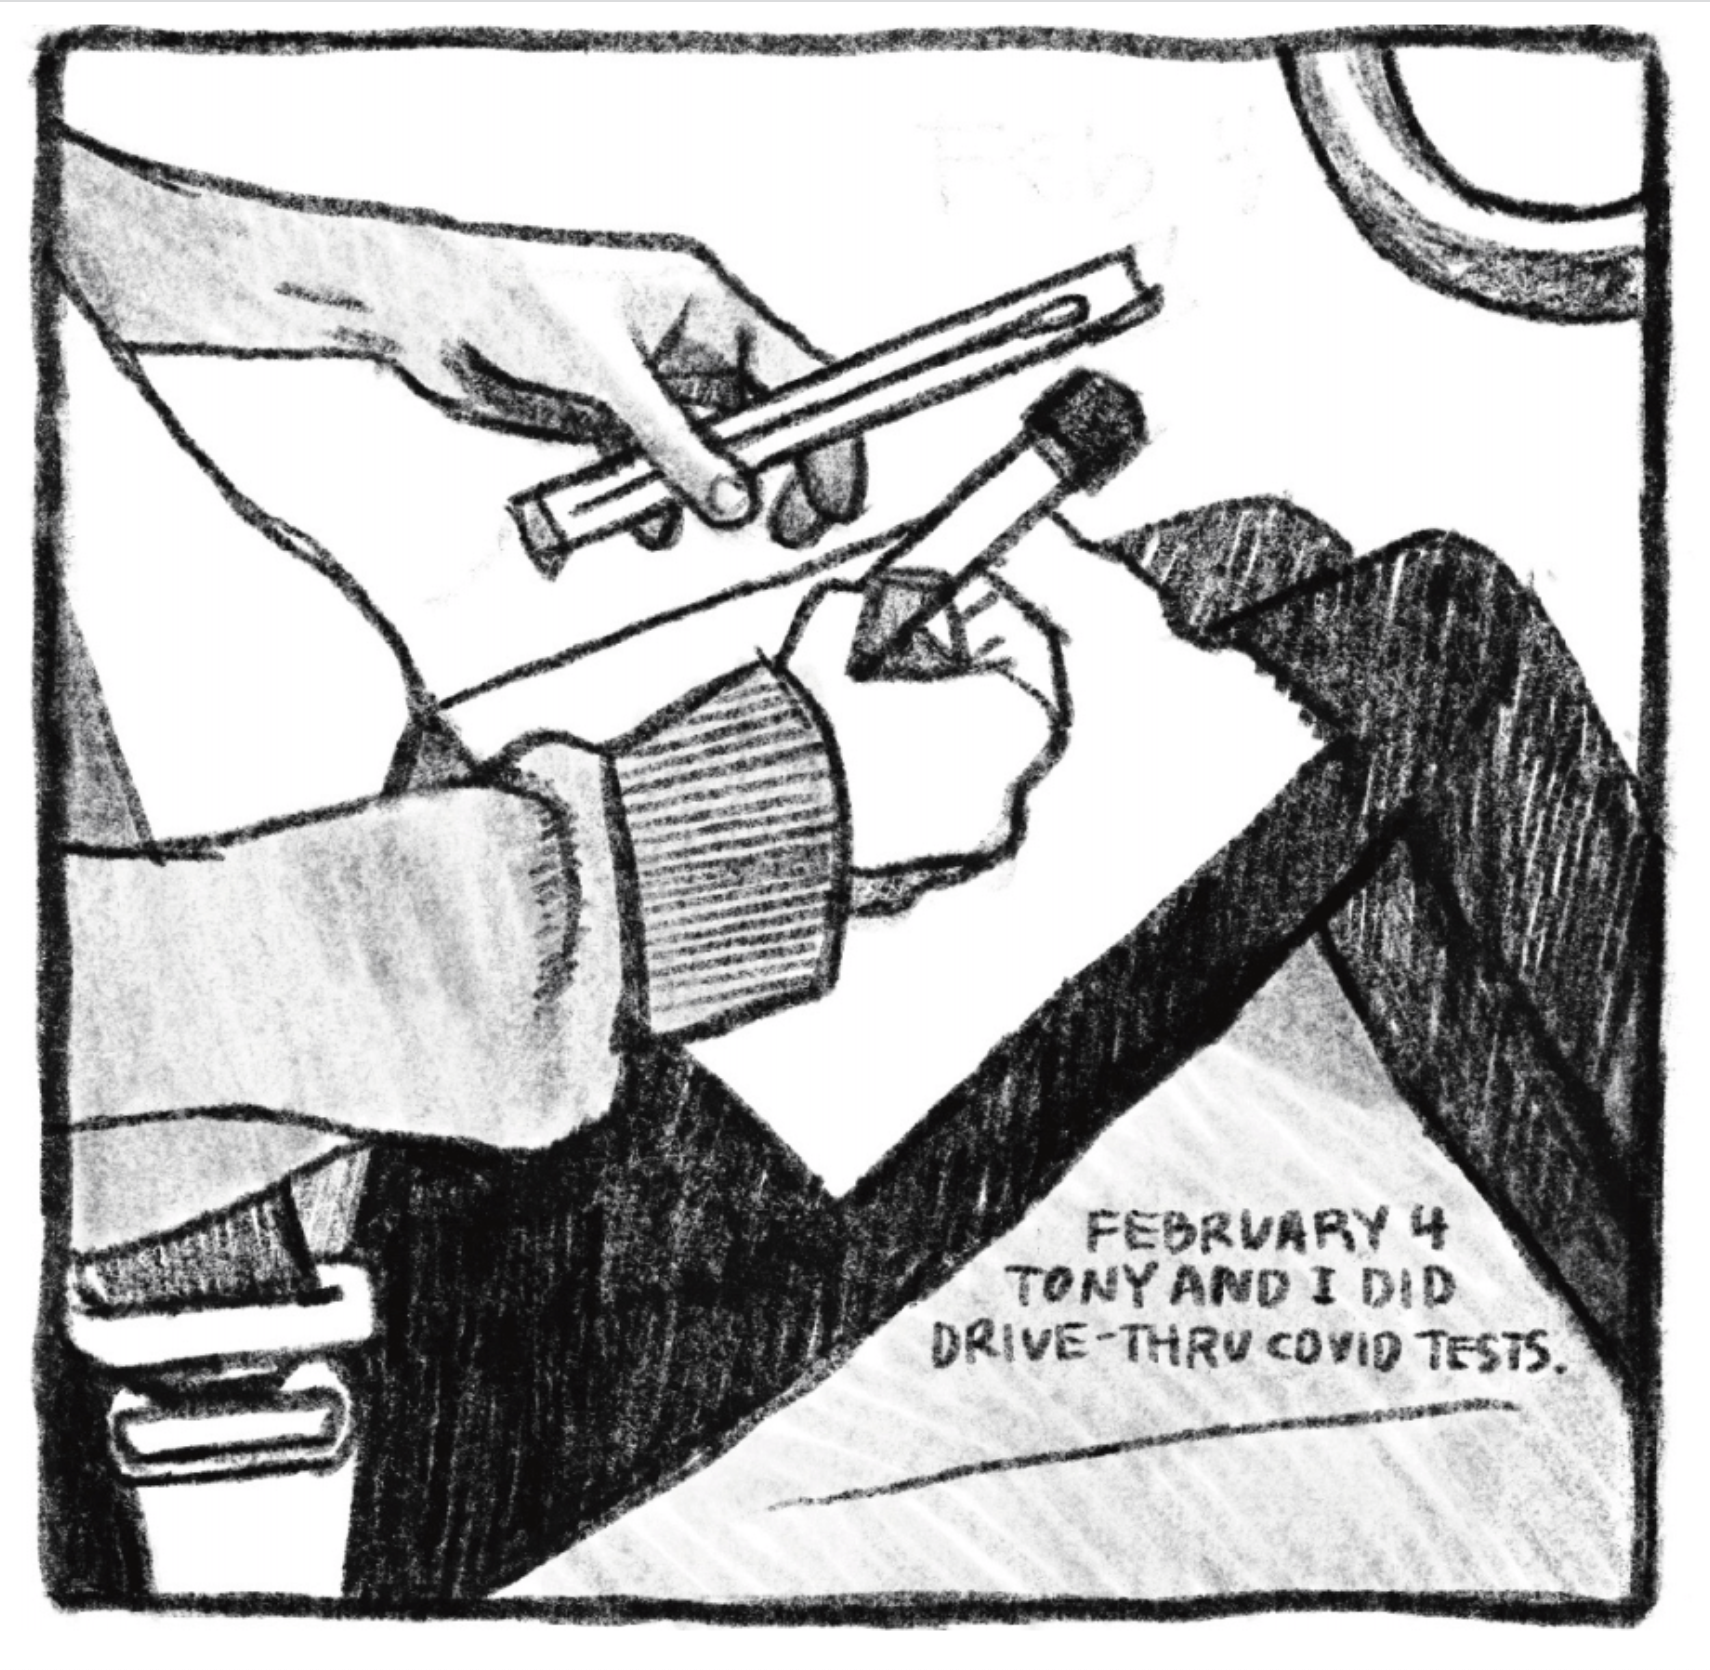 Hold Still Episode 7, Panel 1 "Feb 4. Tony and I did drive-thru covid tests." Drawing of person holding Covid test